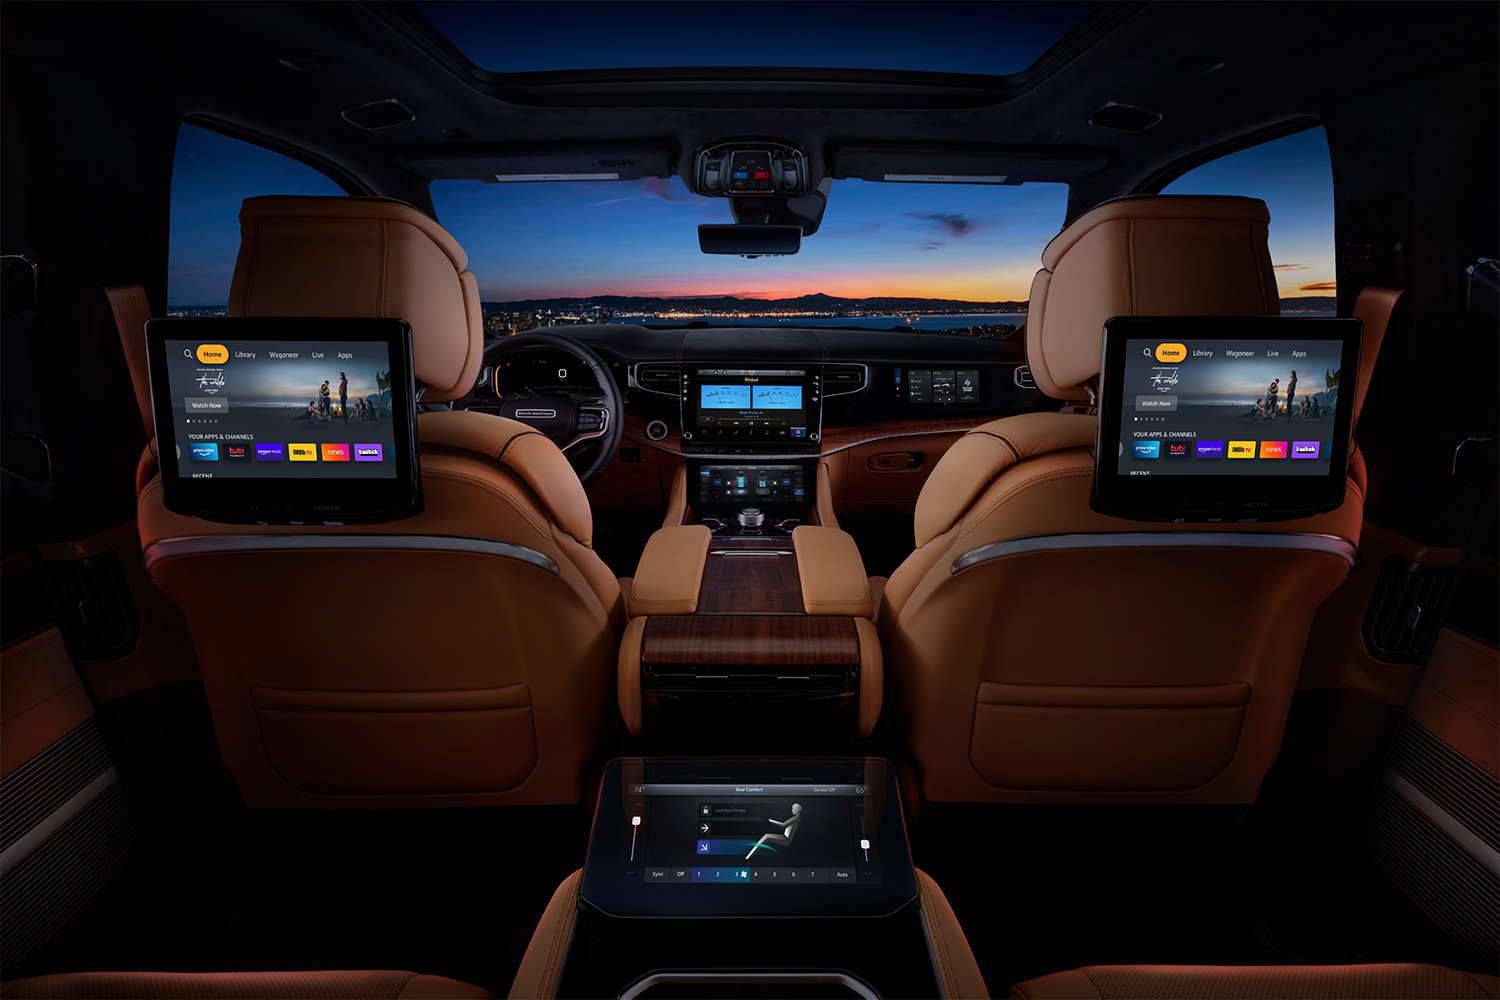 The interior of the 2022 Jeep Grand Wagoneer SUV shot from the second row, showing TV screens with Amazon Fire TV for Auto